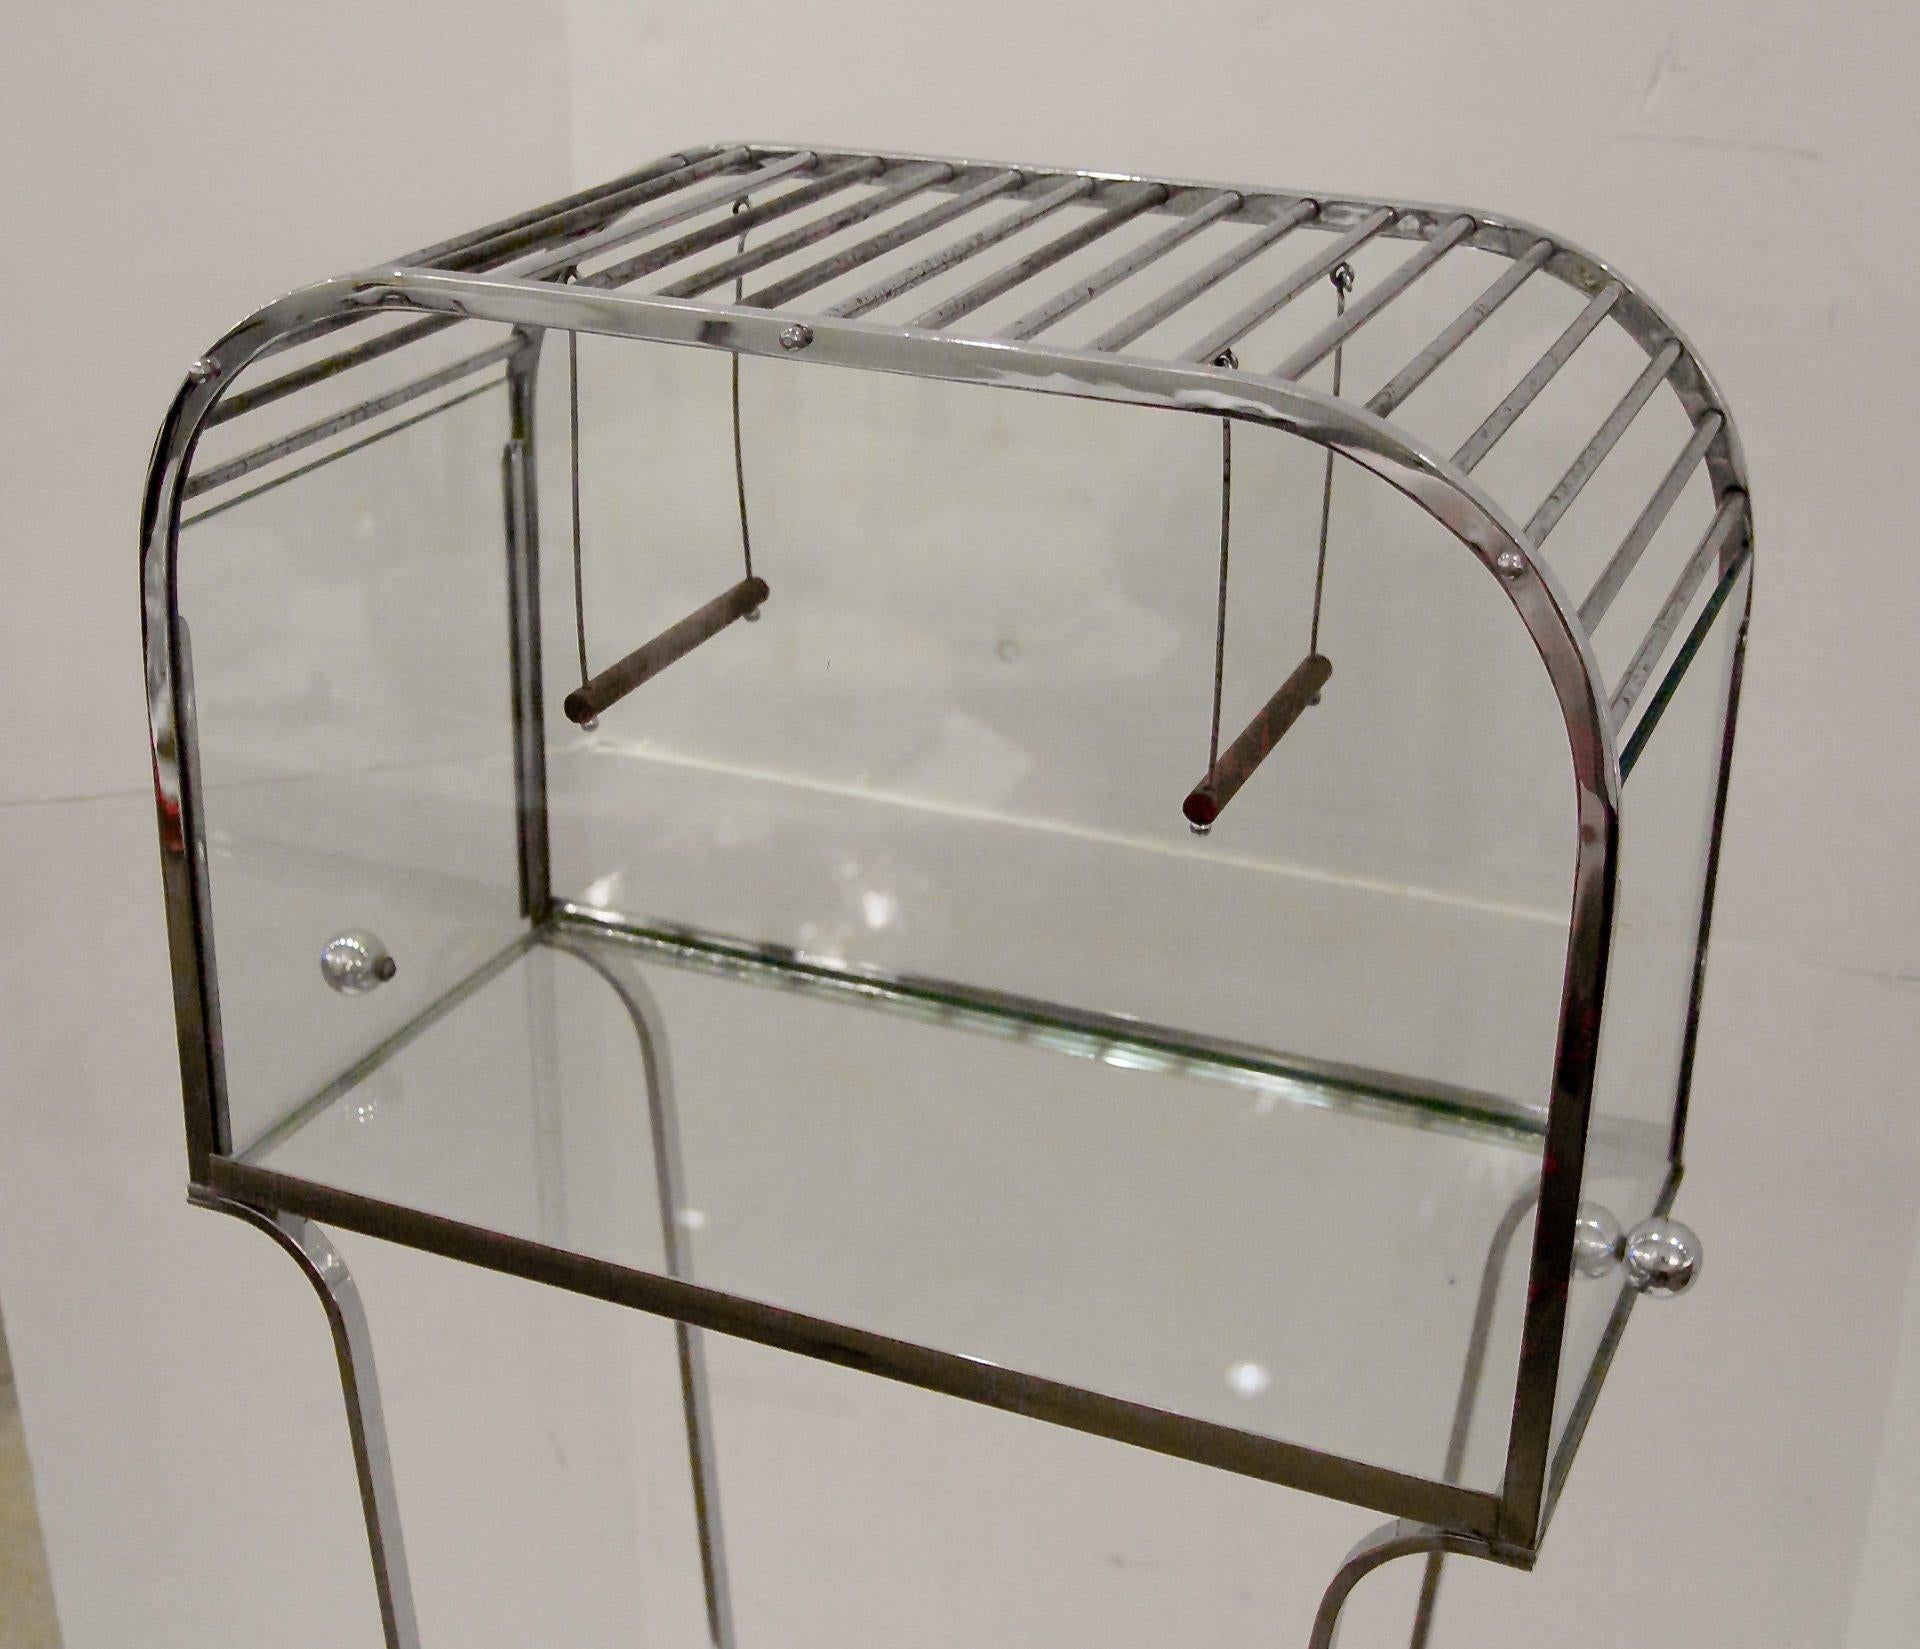 20th Century Art Deco Glass and Chrome Birdcage For Sale